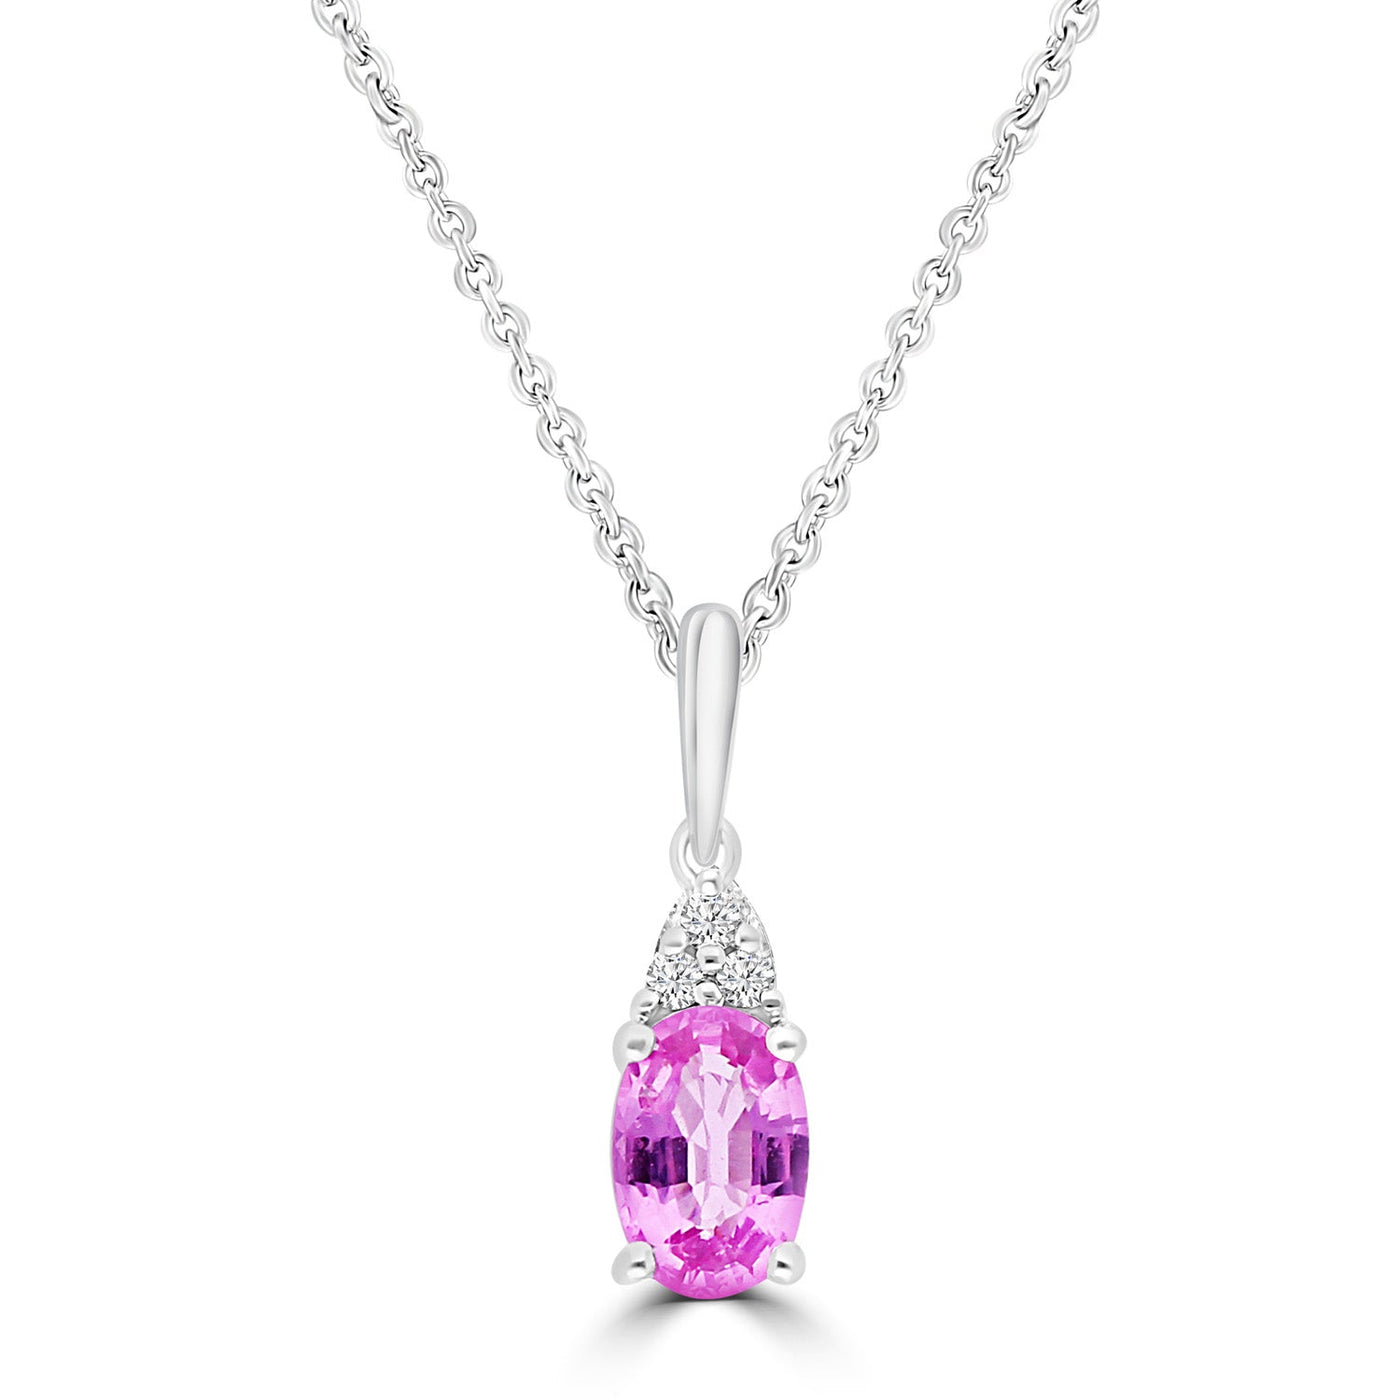 0.02ct HI I1 Diamond & Pink Sapphire Necklace 45cm in 9K White Gold